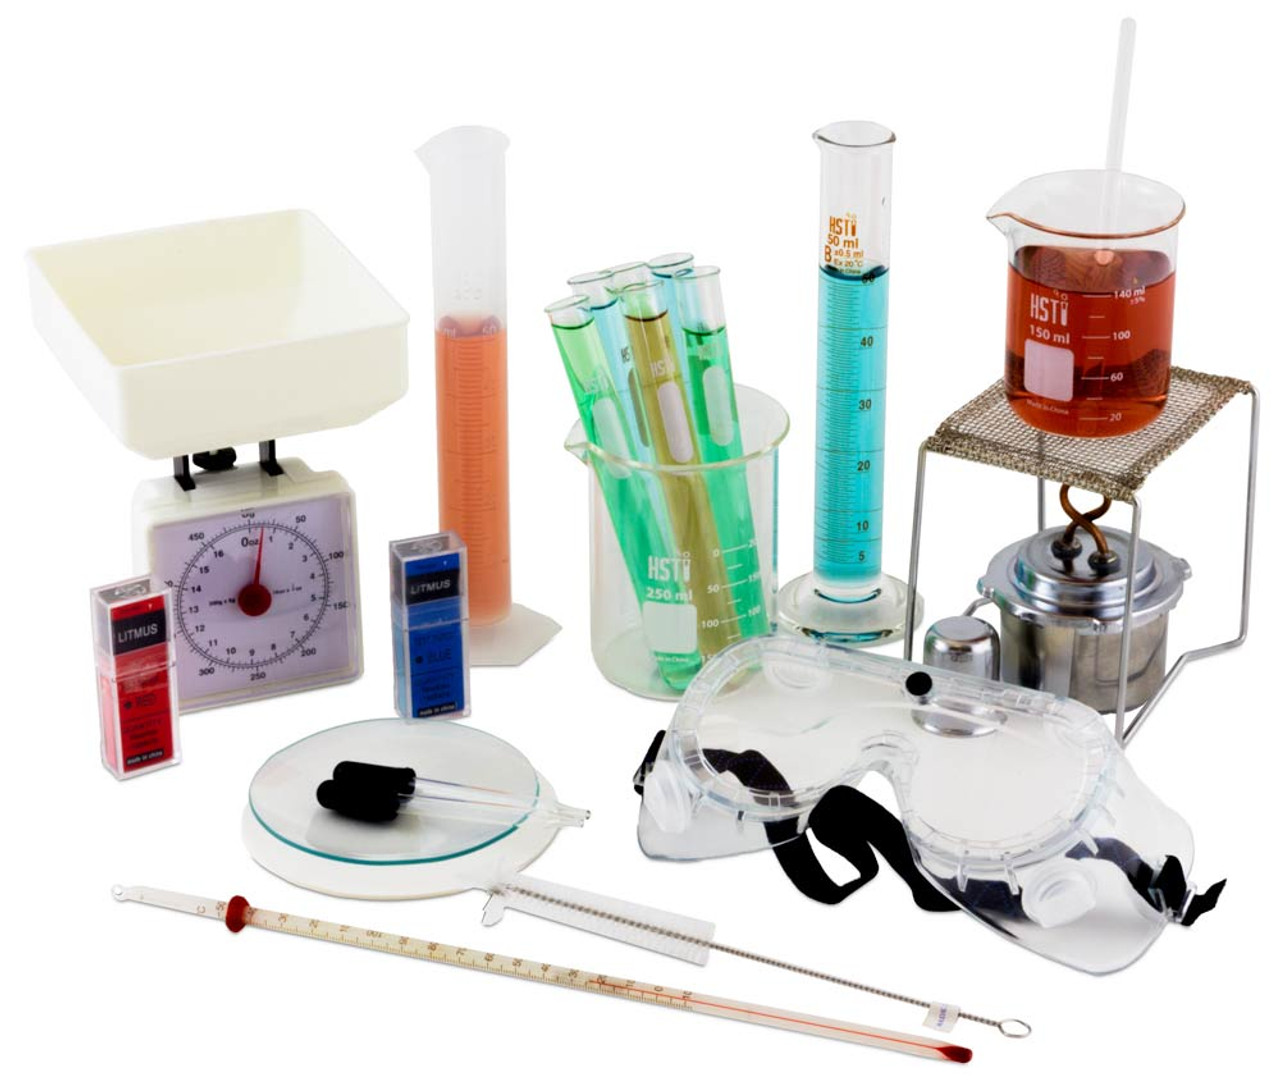 apologia-chemistry-kit-save-10-on-your-homeschool-lab